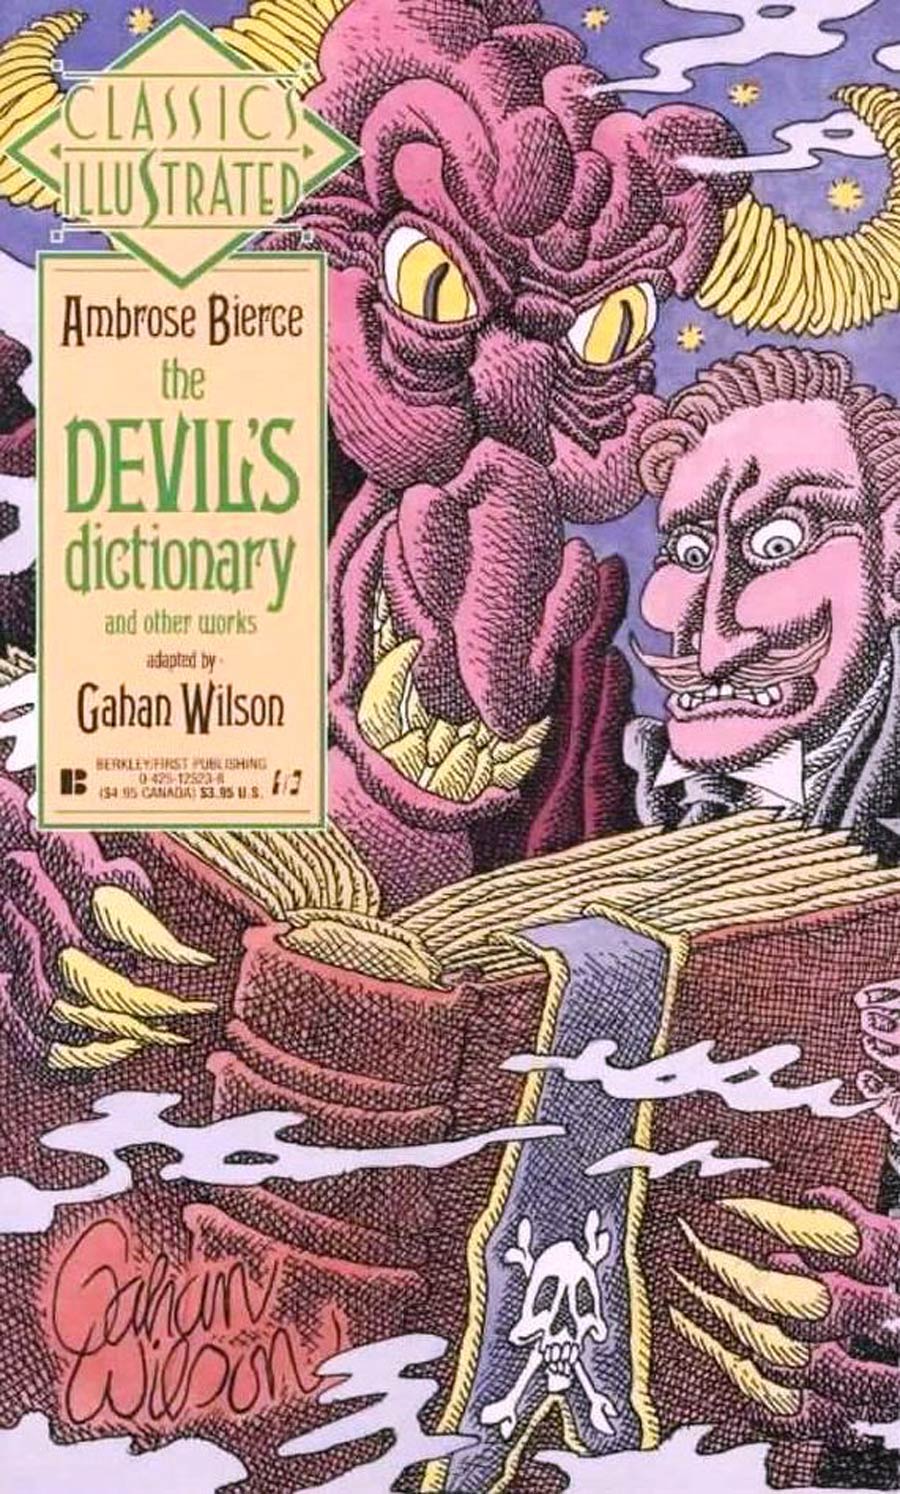 Classics Illustrated Vol 2 #18 The Devils Dictionary And Other Works